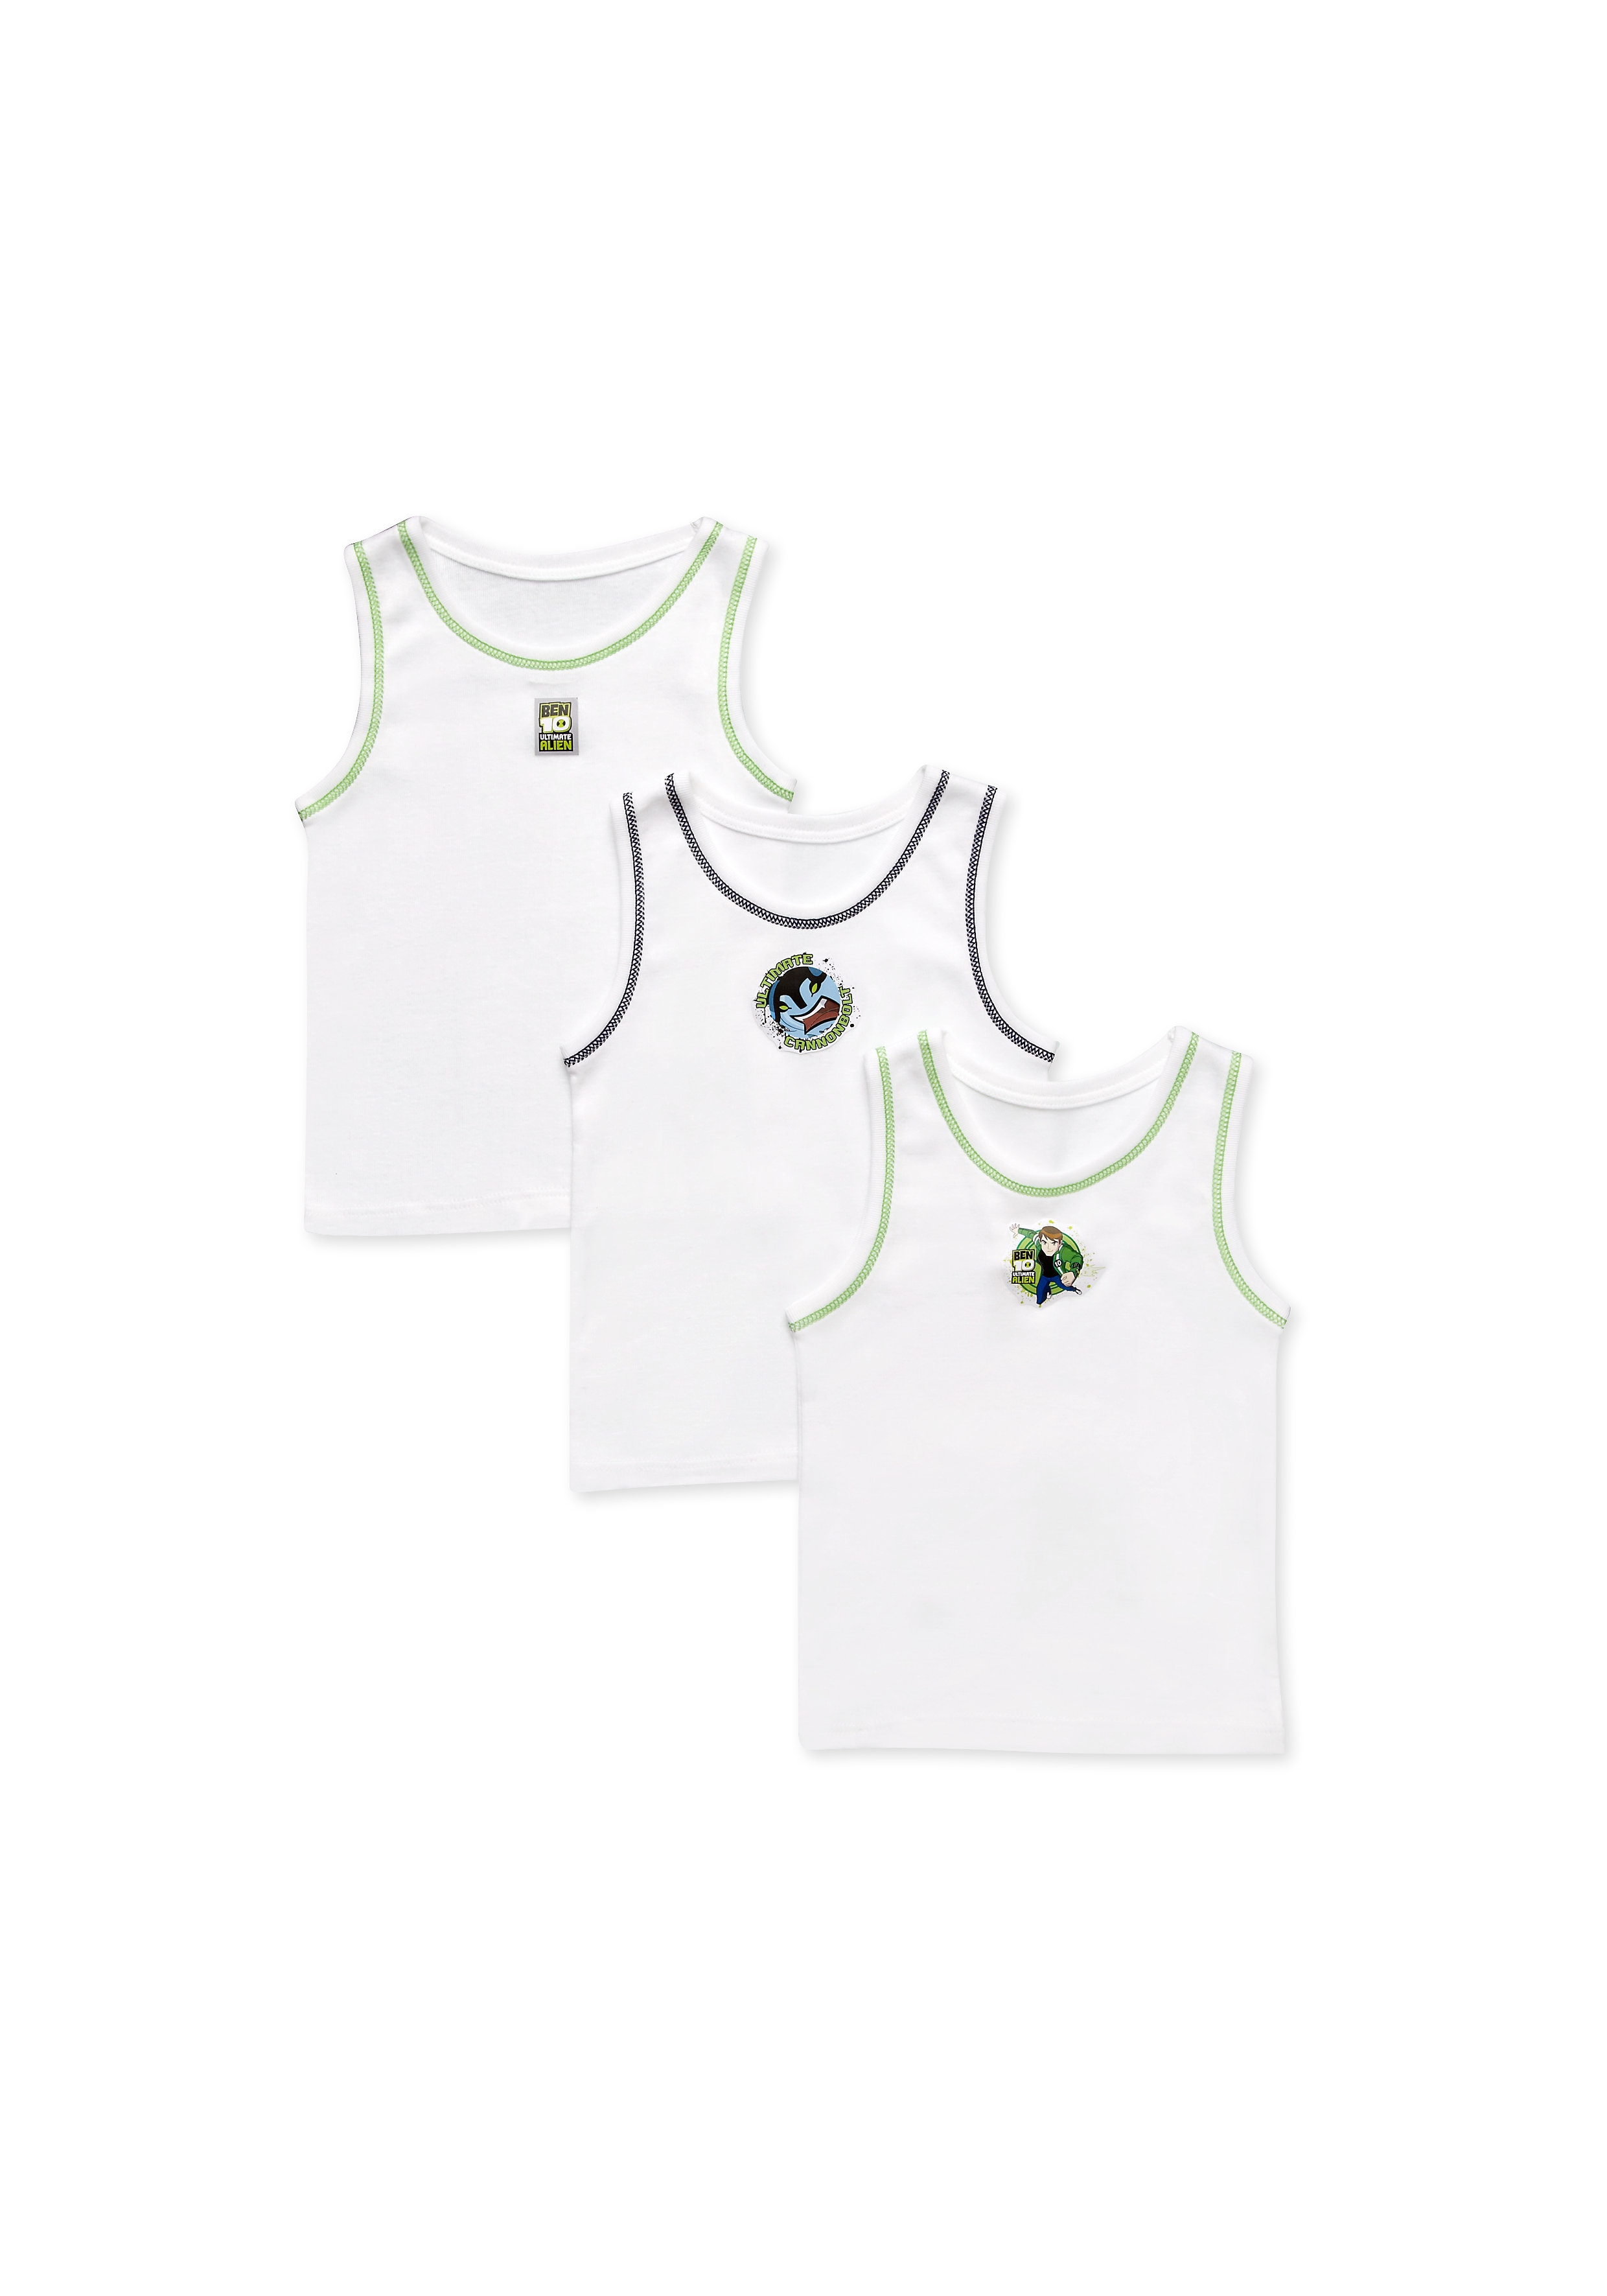 Mothercare | Boys Ben 10 Vests â€“ Pack Of 3 - White